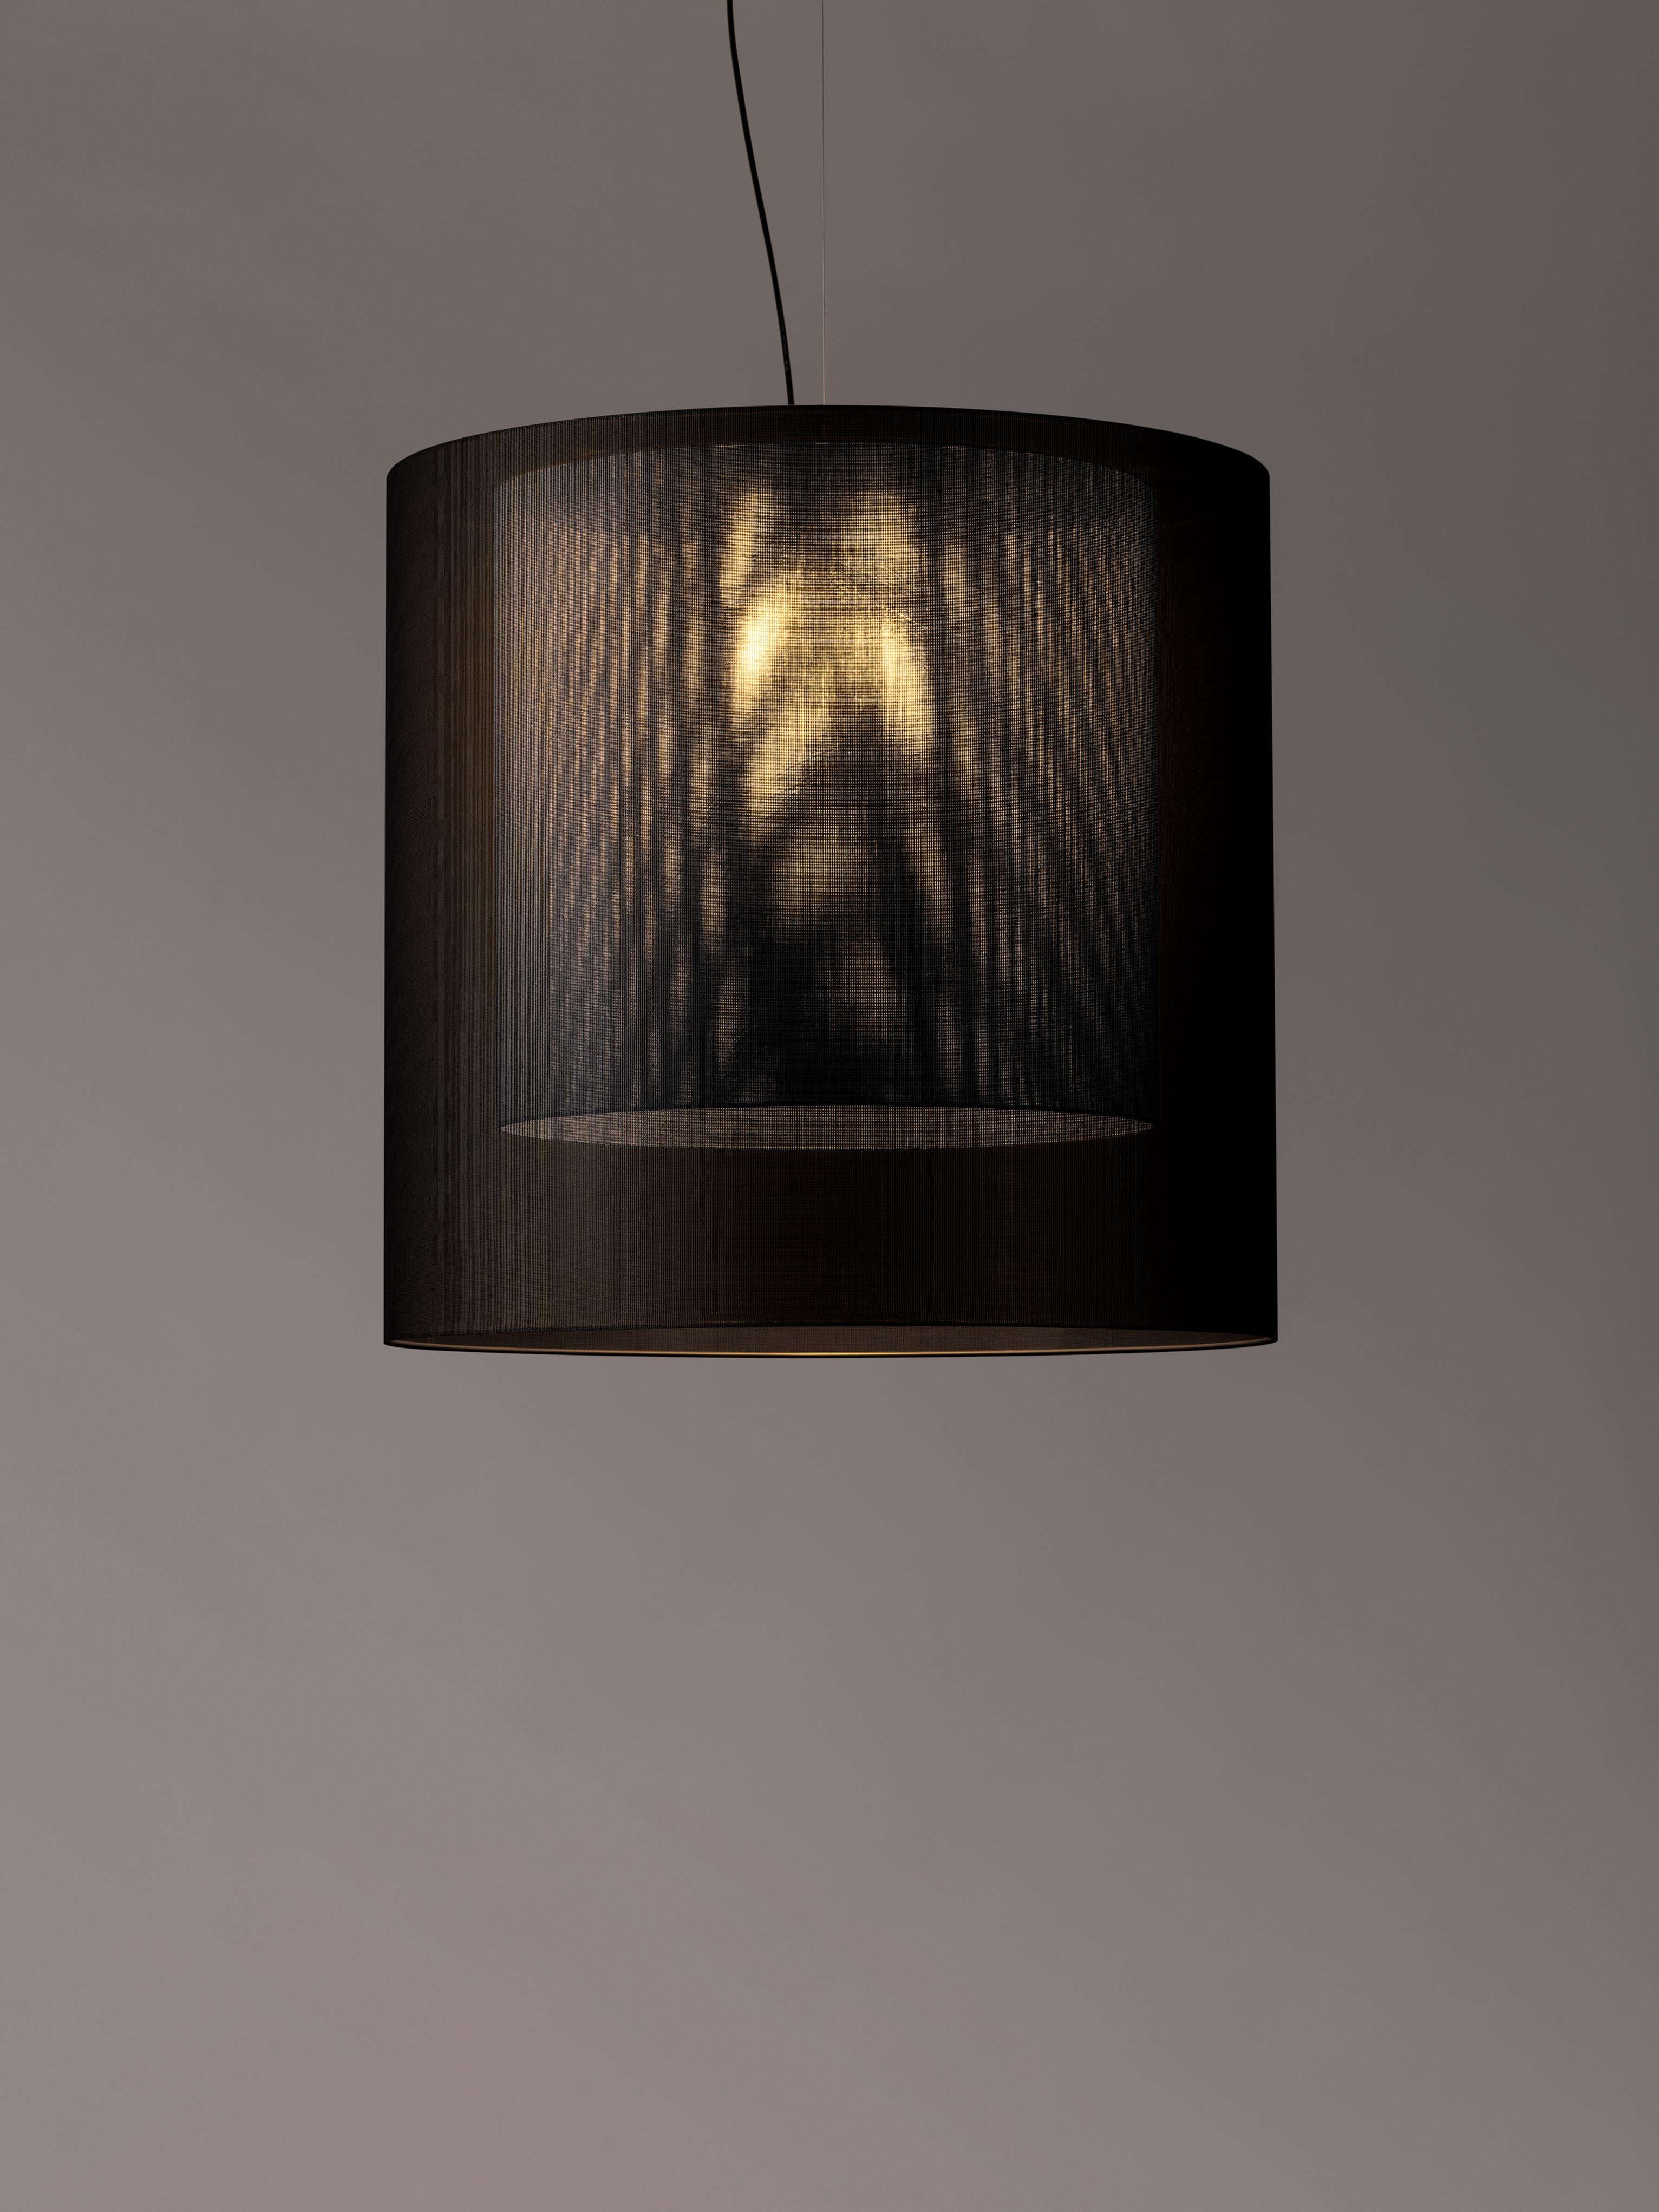 Black and grey Moaré XL pendant lamp by Antoni Arola
Dimensions: D 83 x H 81 cm
Materials: Metal, polyester.
Available in other colors and sizes.

Moaré’s multiple combinations of formats and colours make it highly versatile. The series takes